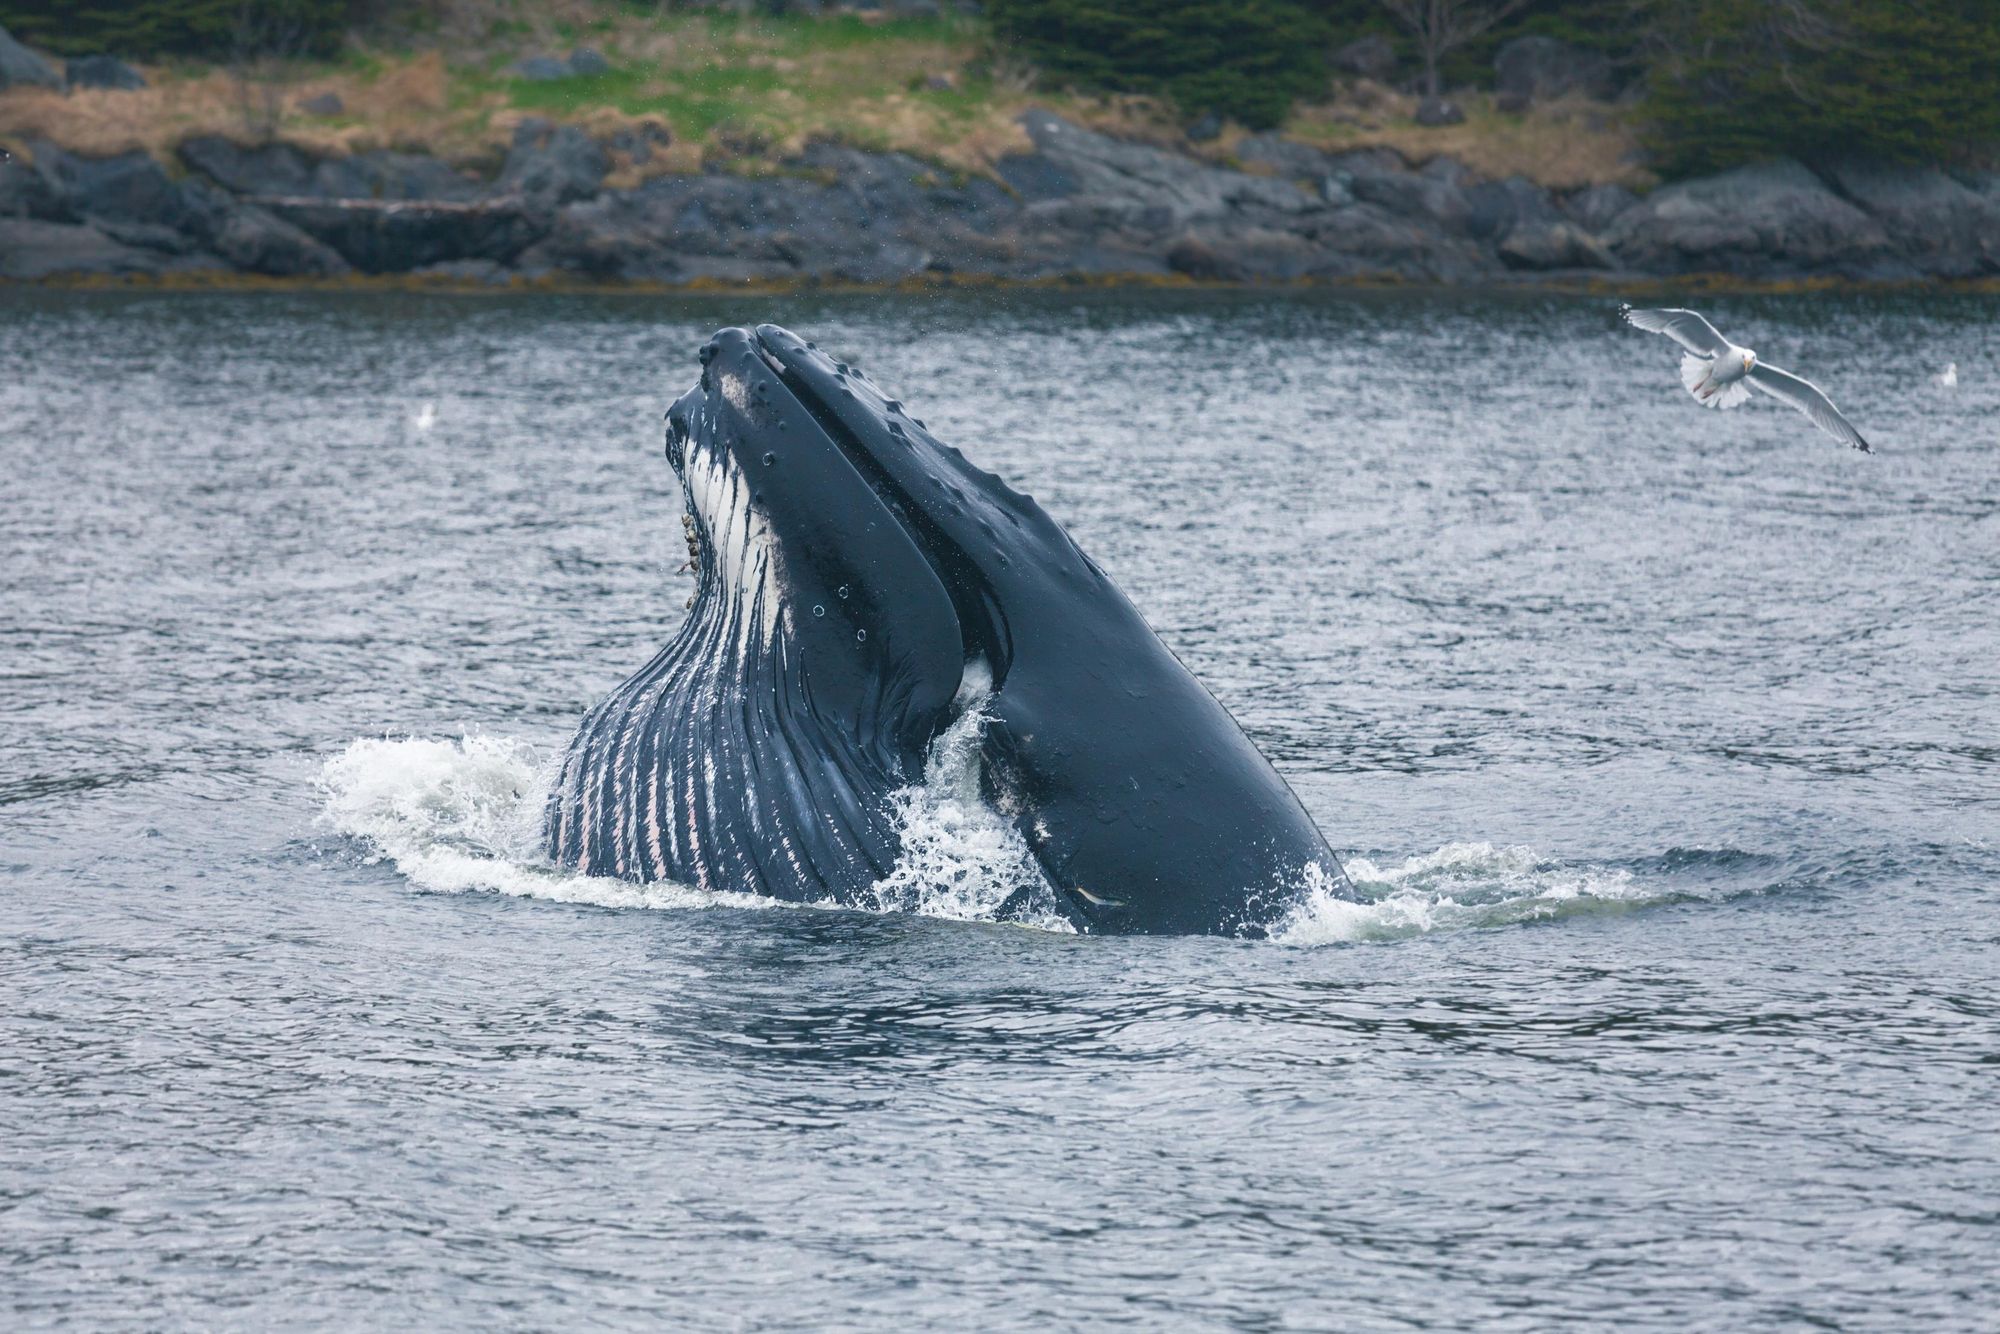 A humpback whale breaches the water. Photo: Getty